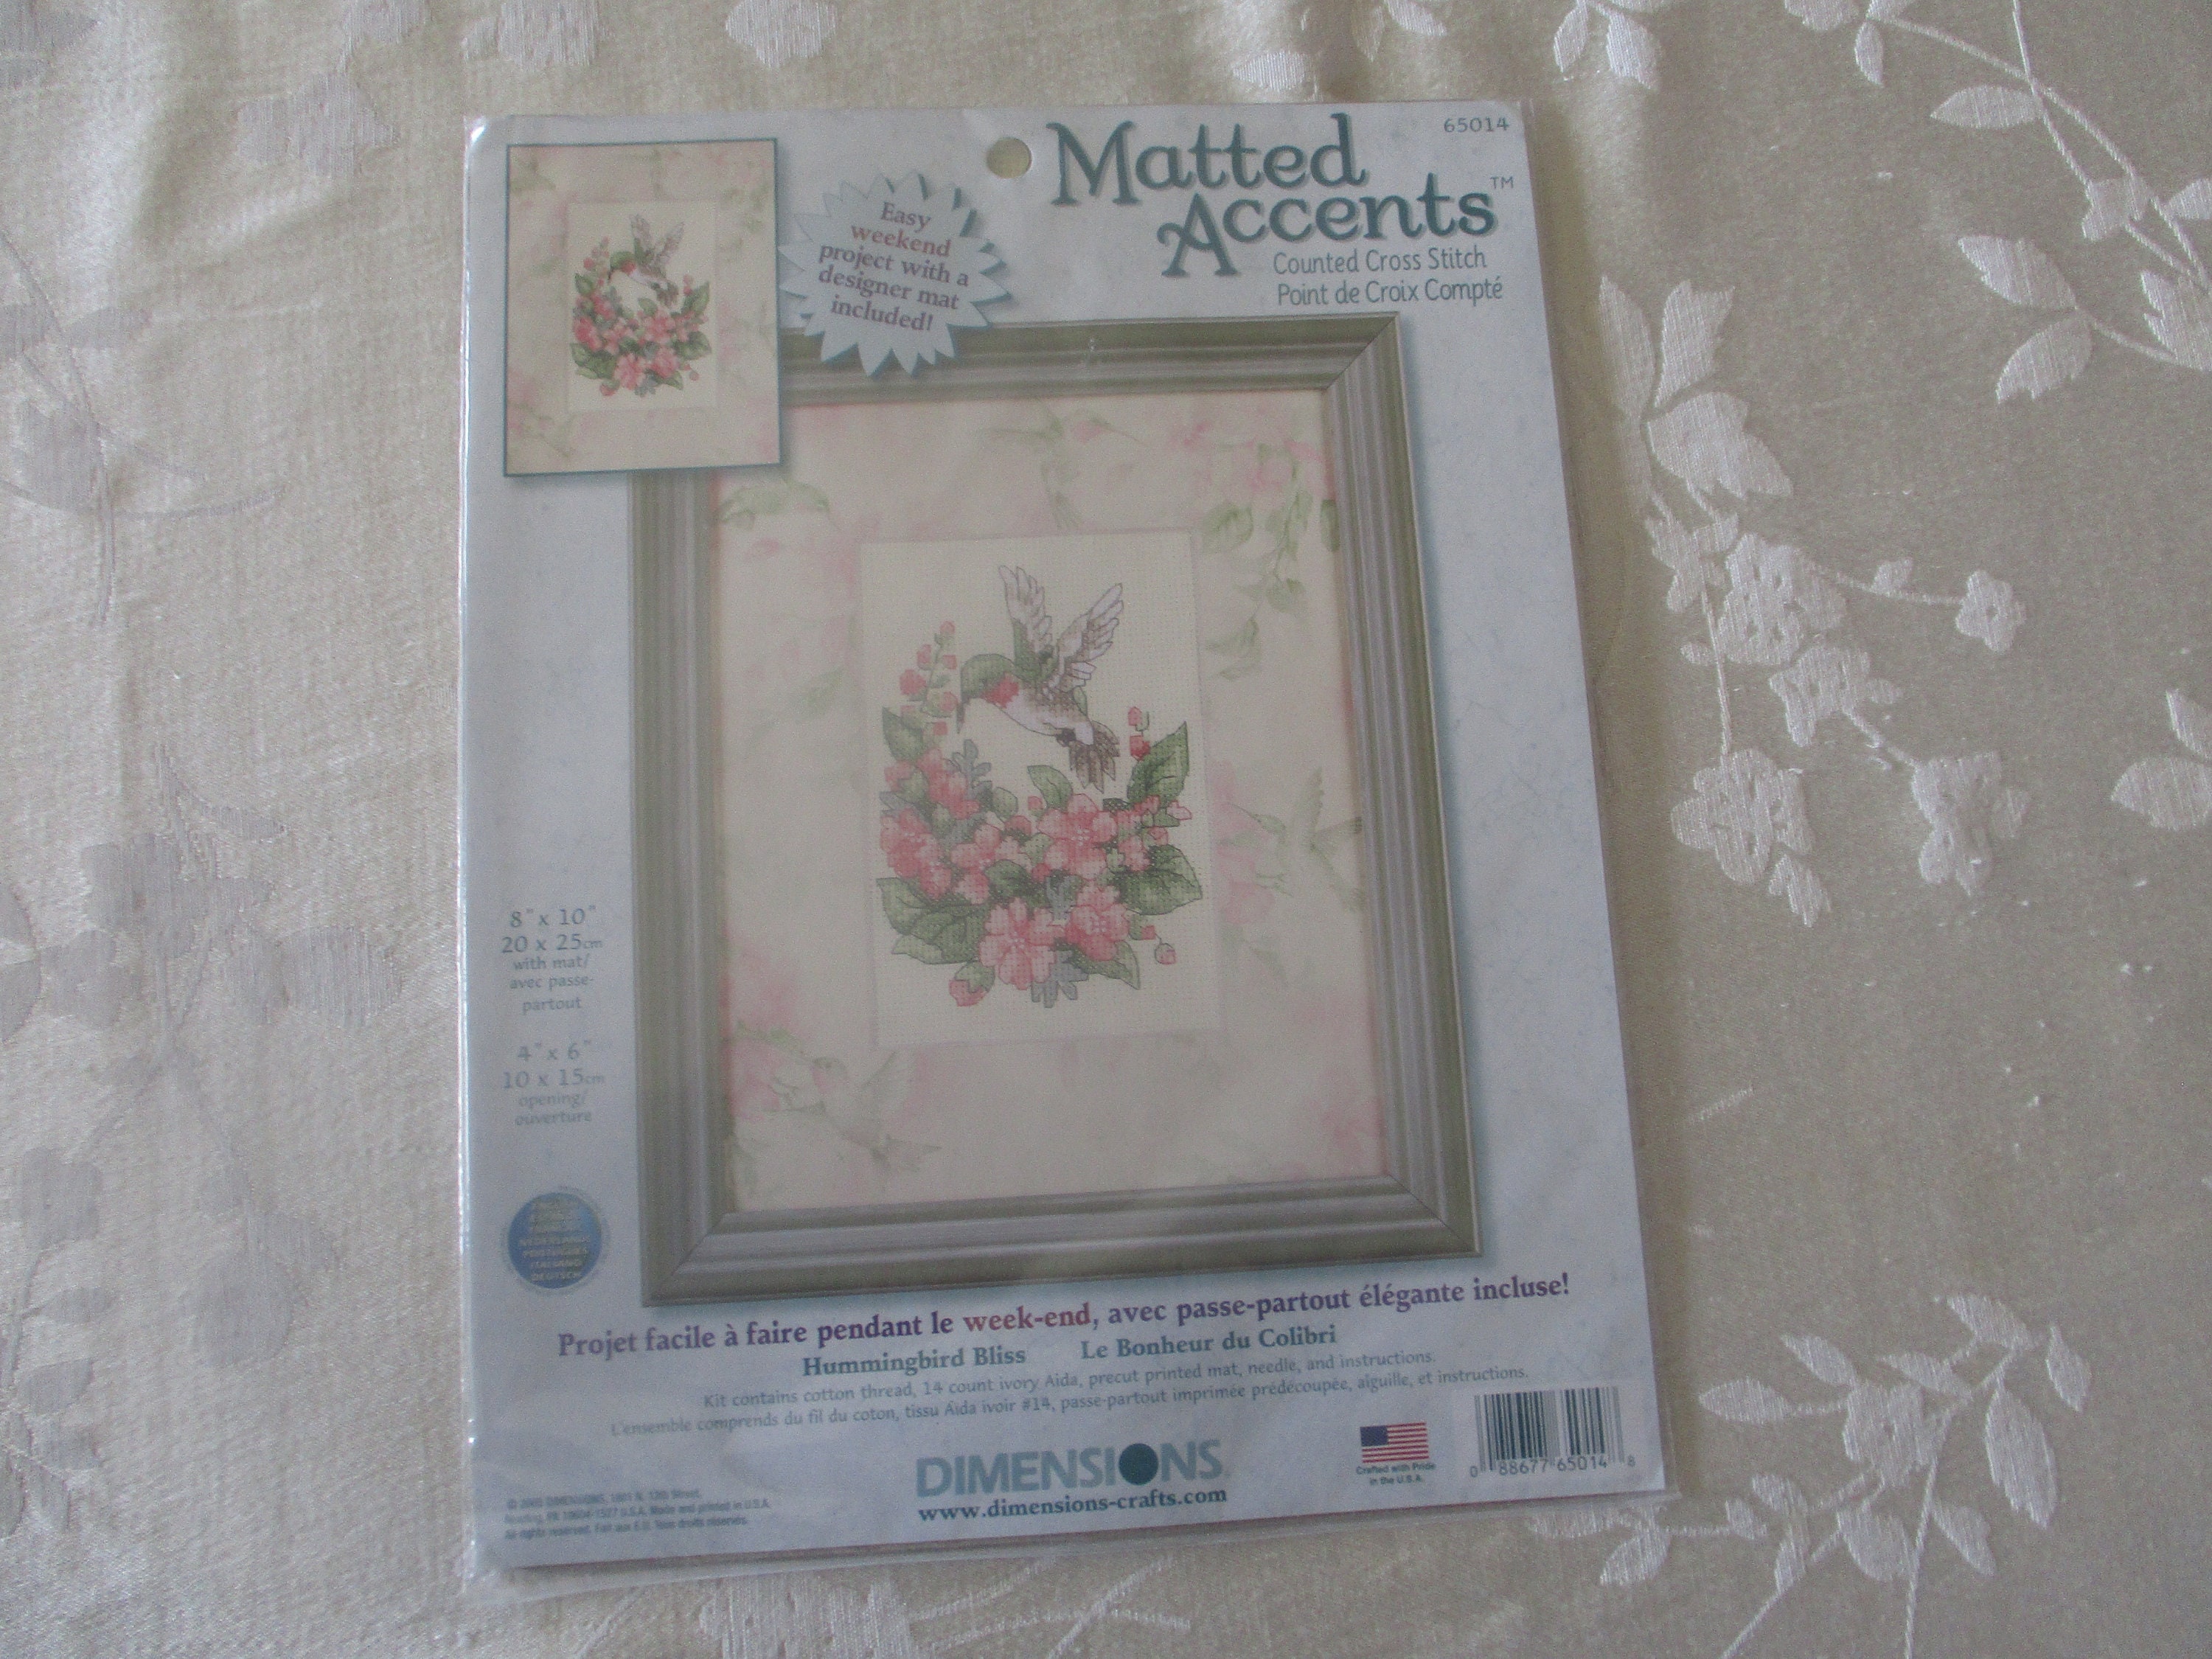 DIAMOND PAINTING KIT Hummingbird Floral Crystal Art 20 X 16 Ins With Wooden  Frame Partial Drill 